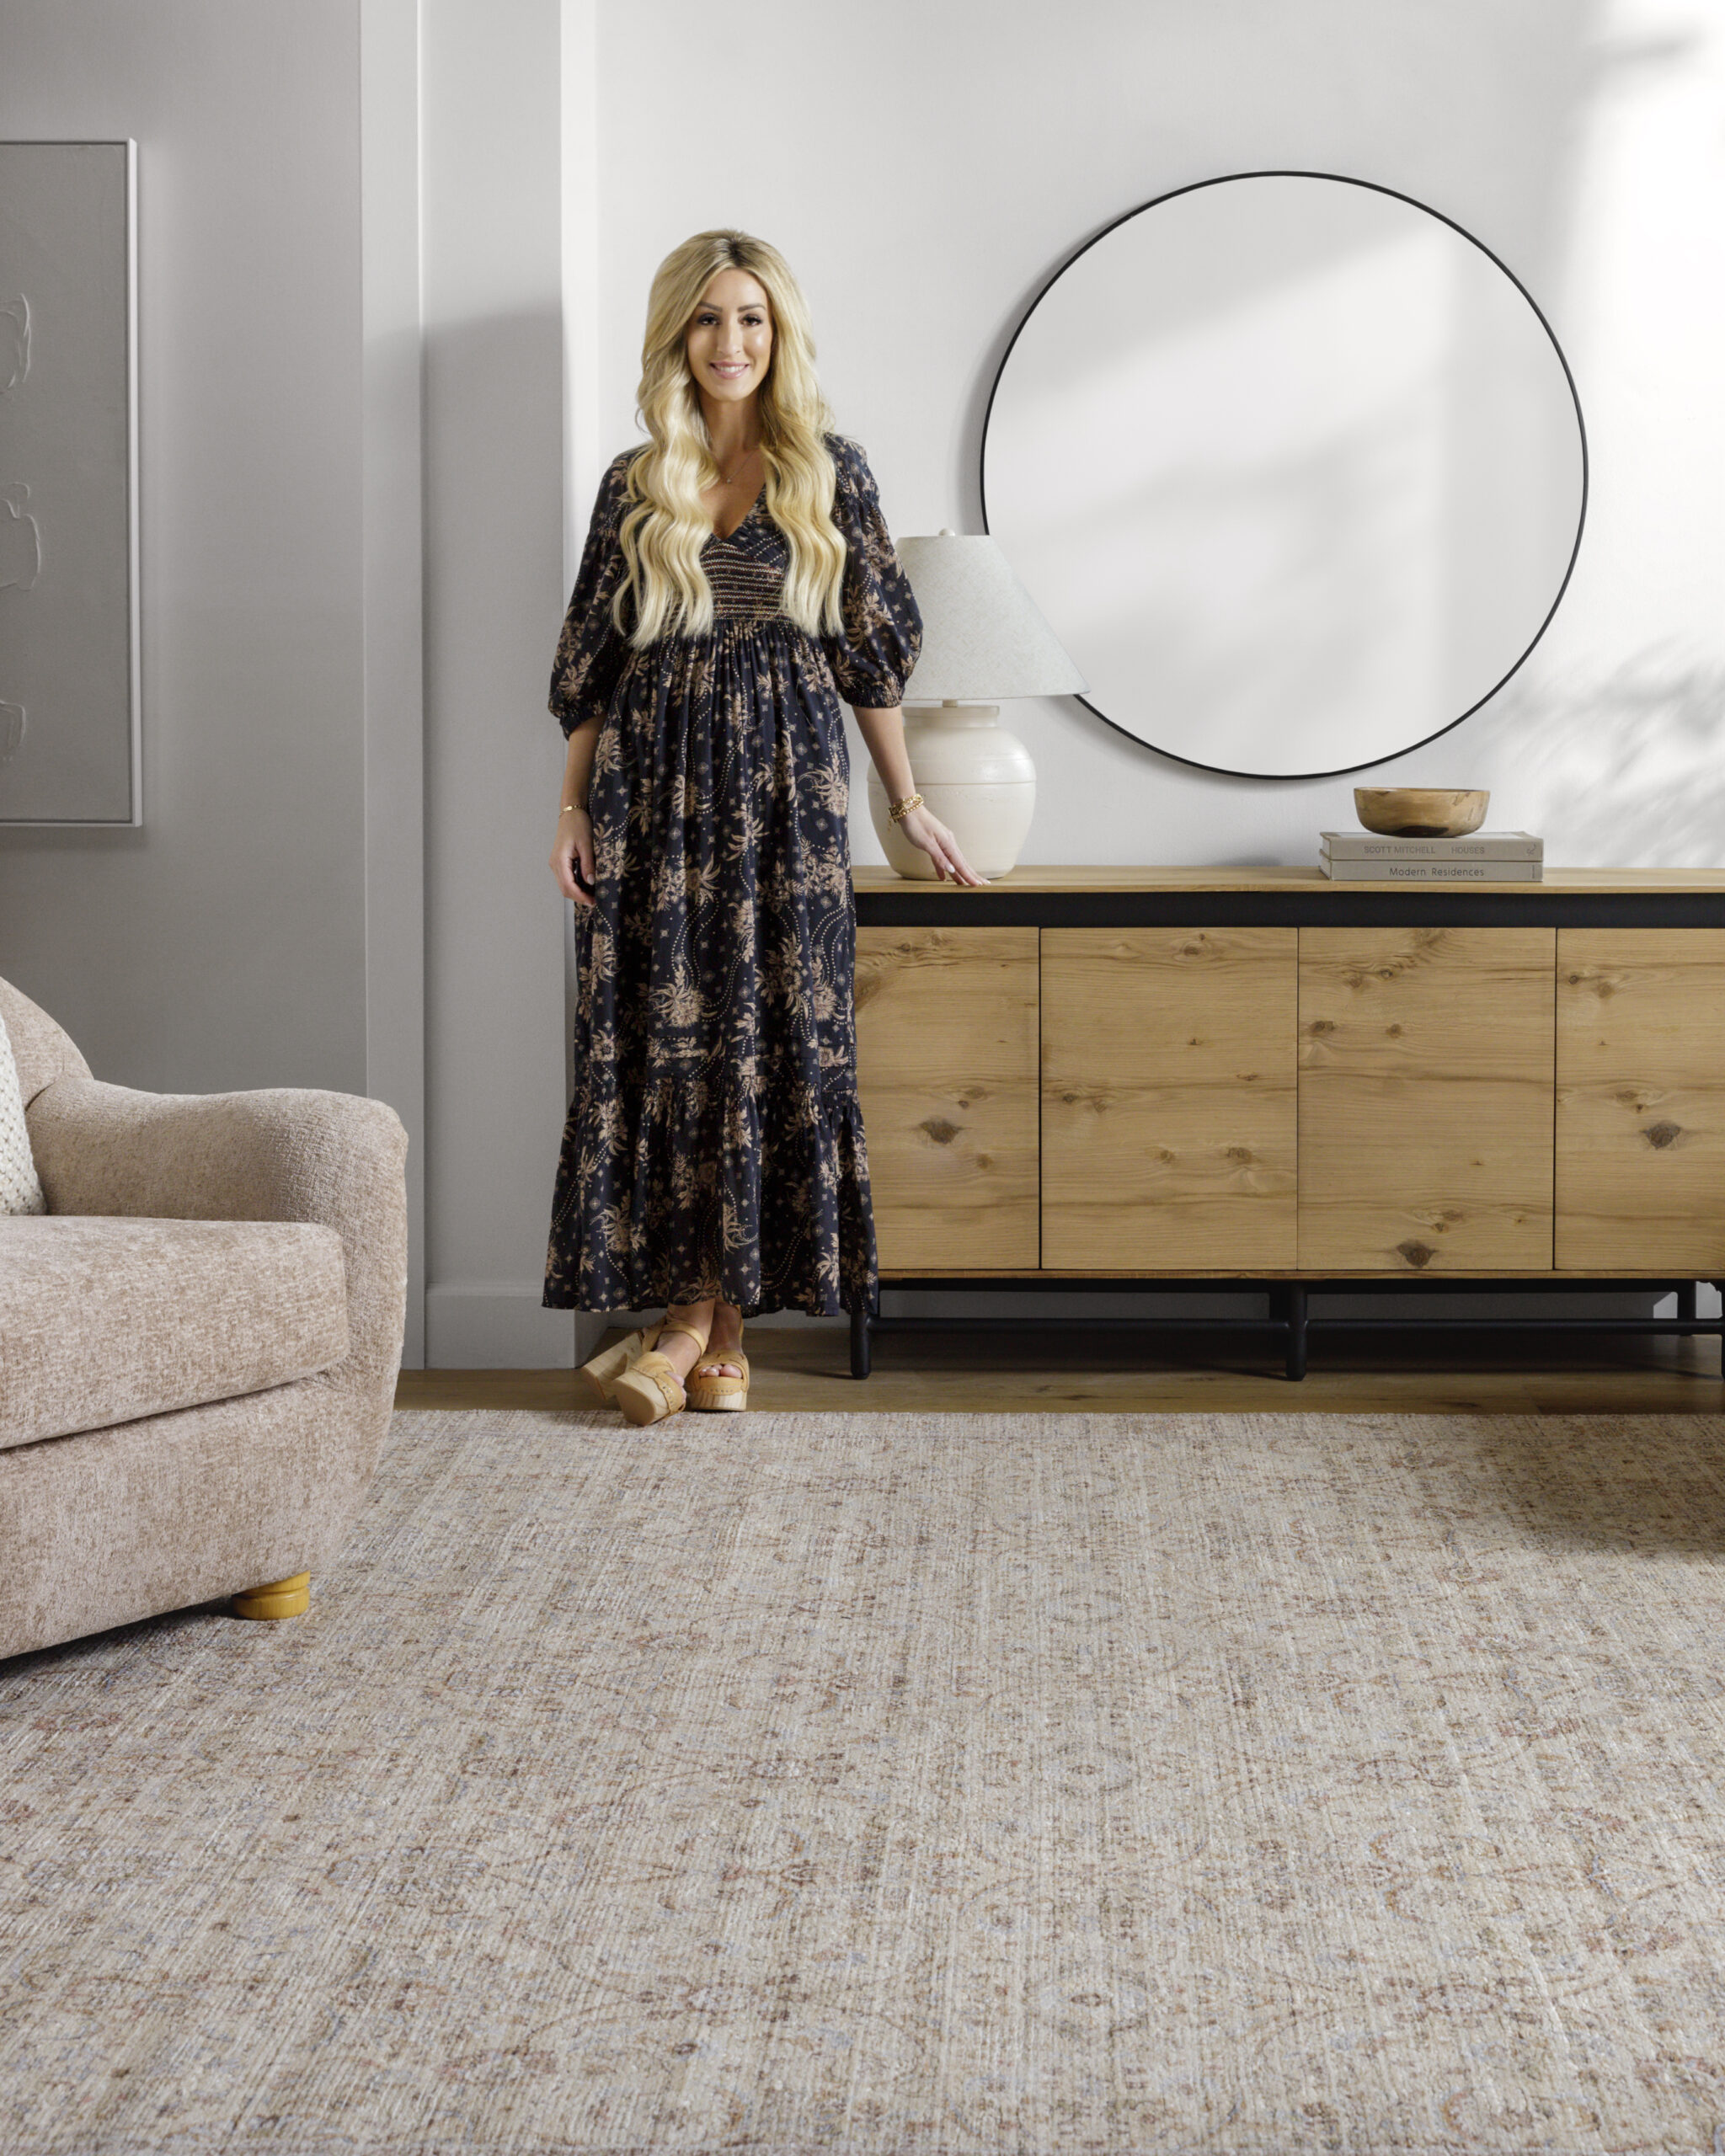 our pnw home x surya rug line launch day | ourpnwhome, surya, rug, launch, home, home decor, neutral home, minimalist home, area rug, home decor ideas, free people, dress, heels